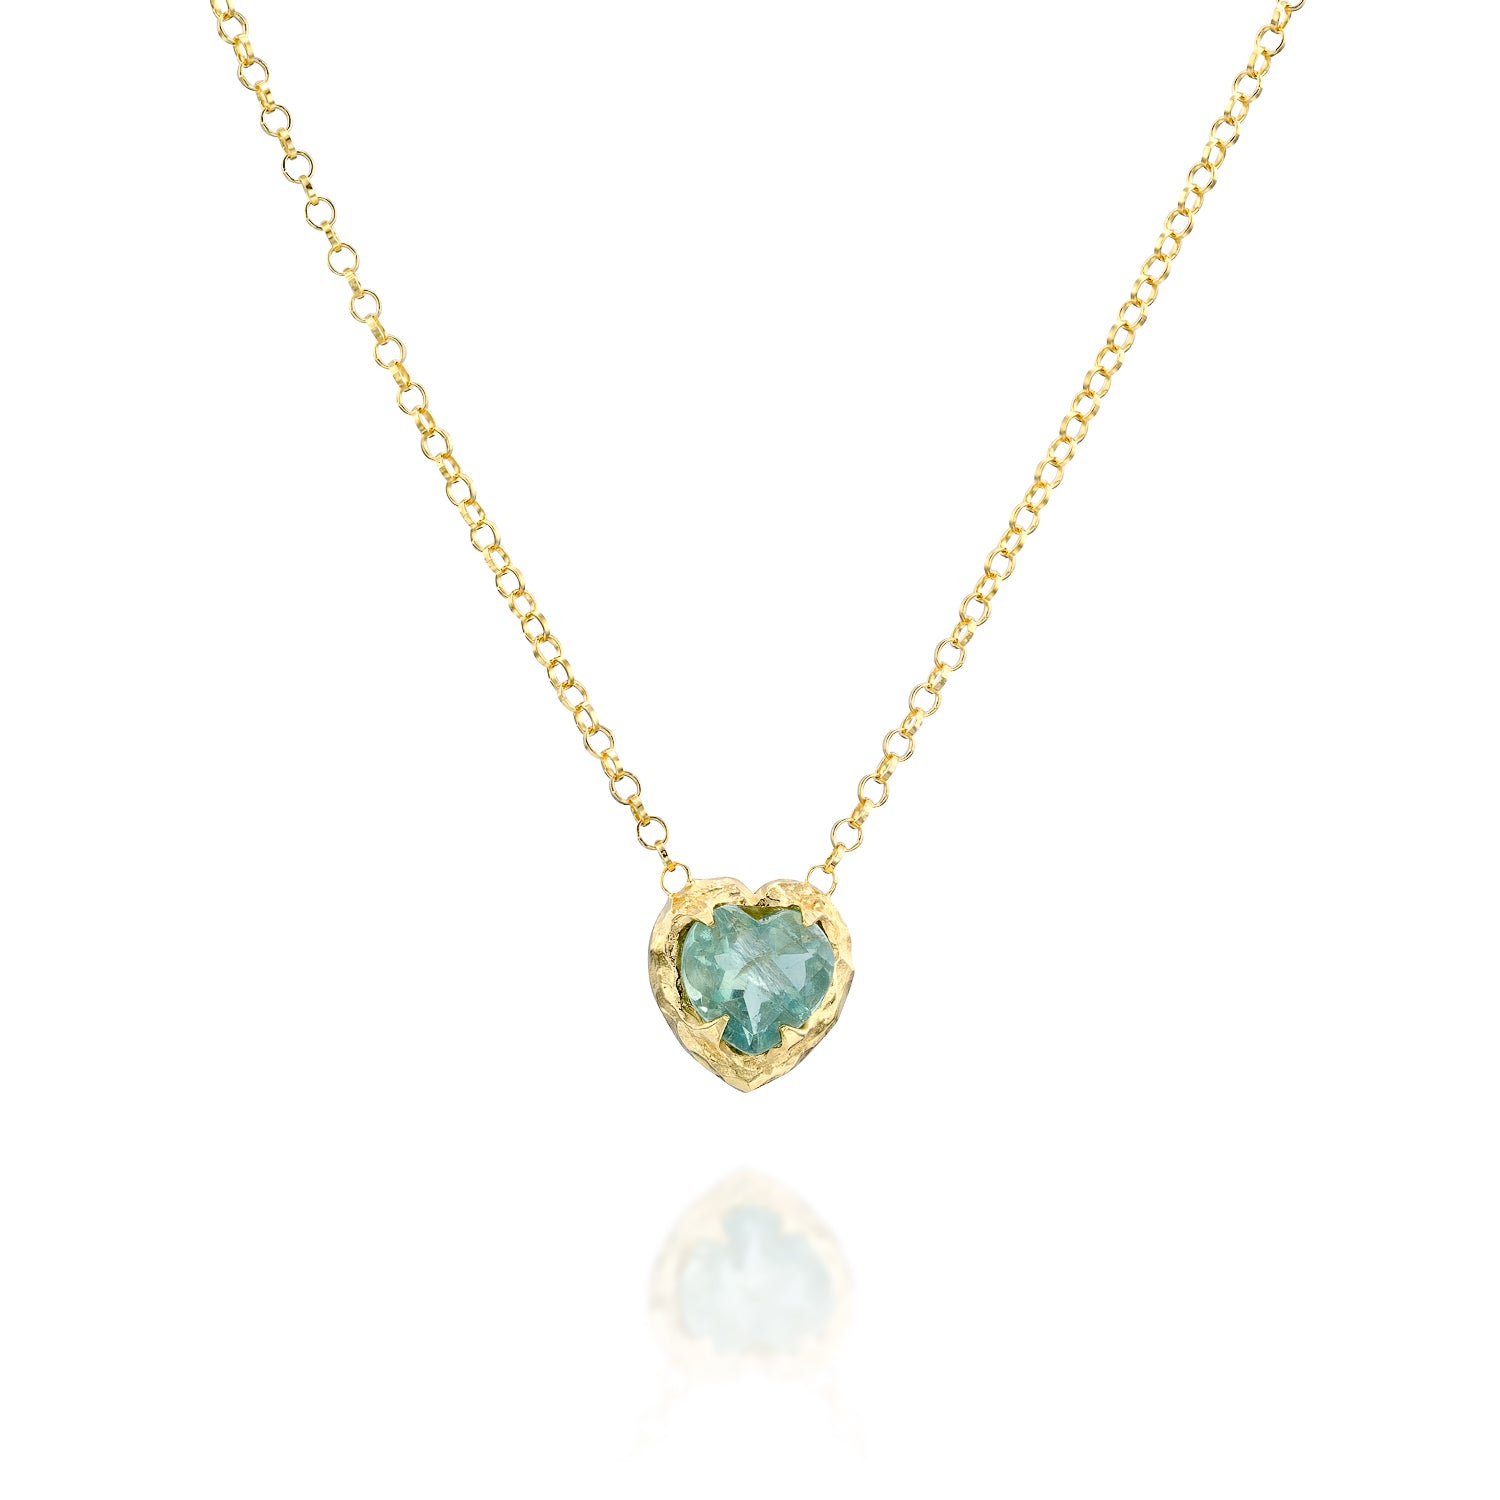 Baby Inanna Necklace &amp; Green Fluorite - Danielle Gerber Freedom Jewelry